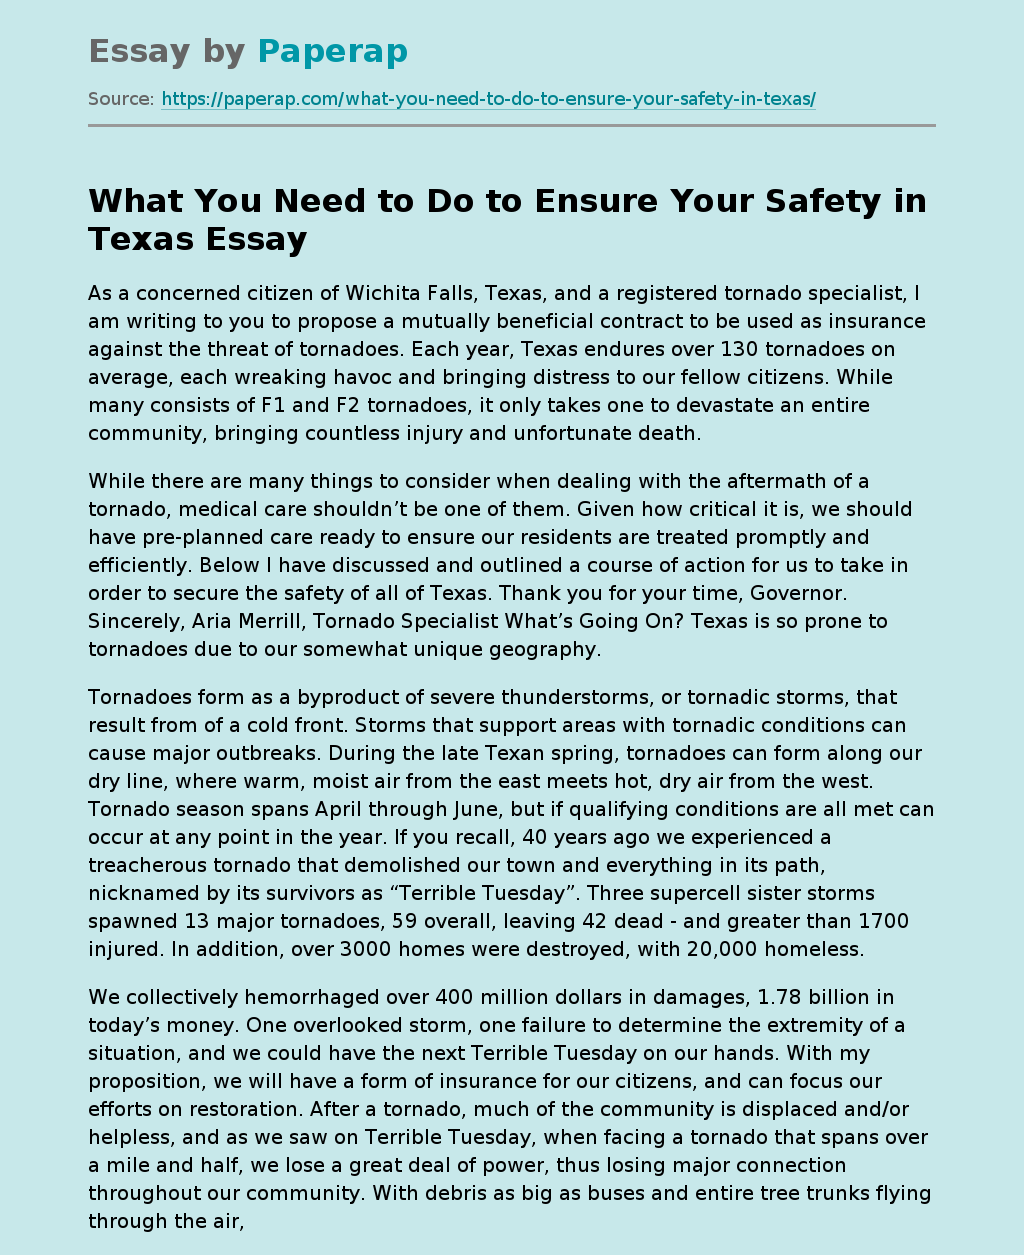 What You Need to Do to Ensure Your Safety in Texas